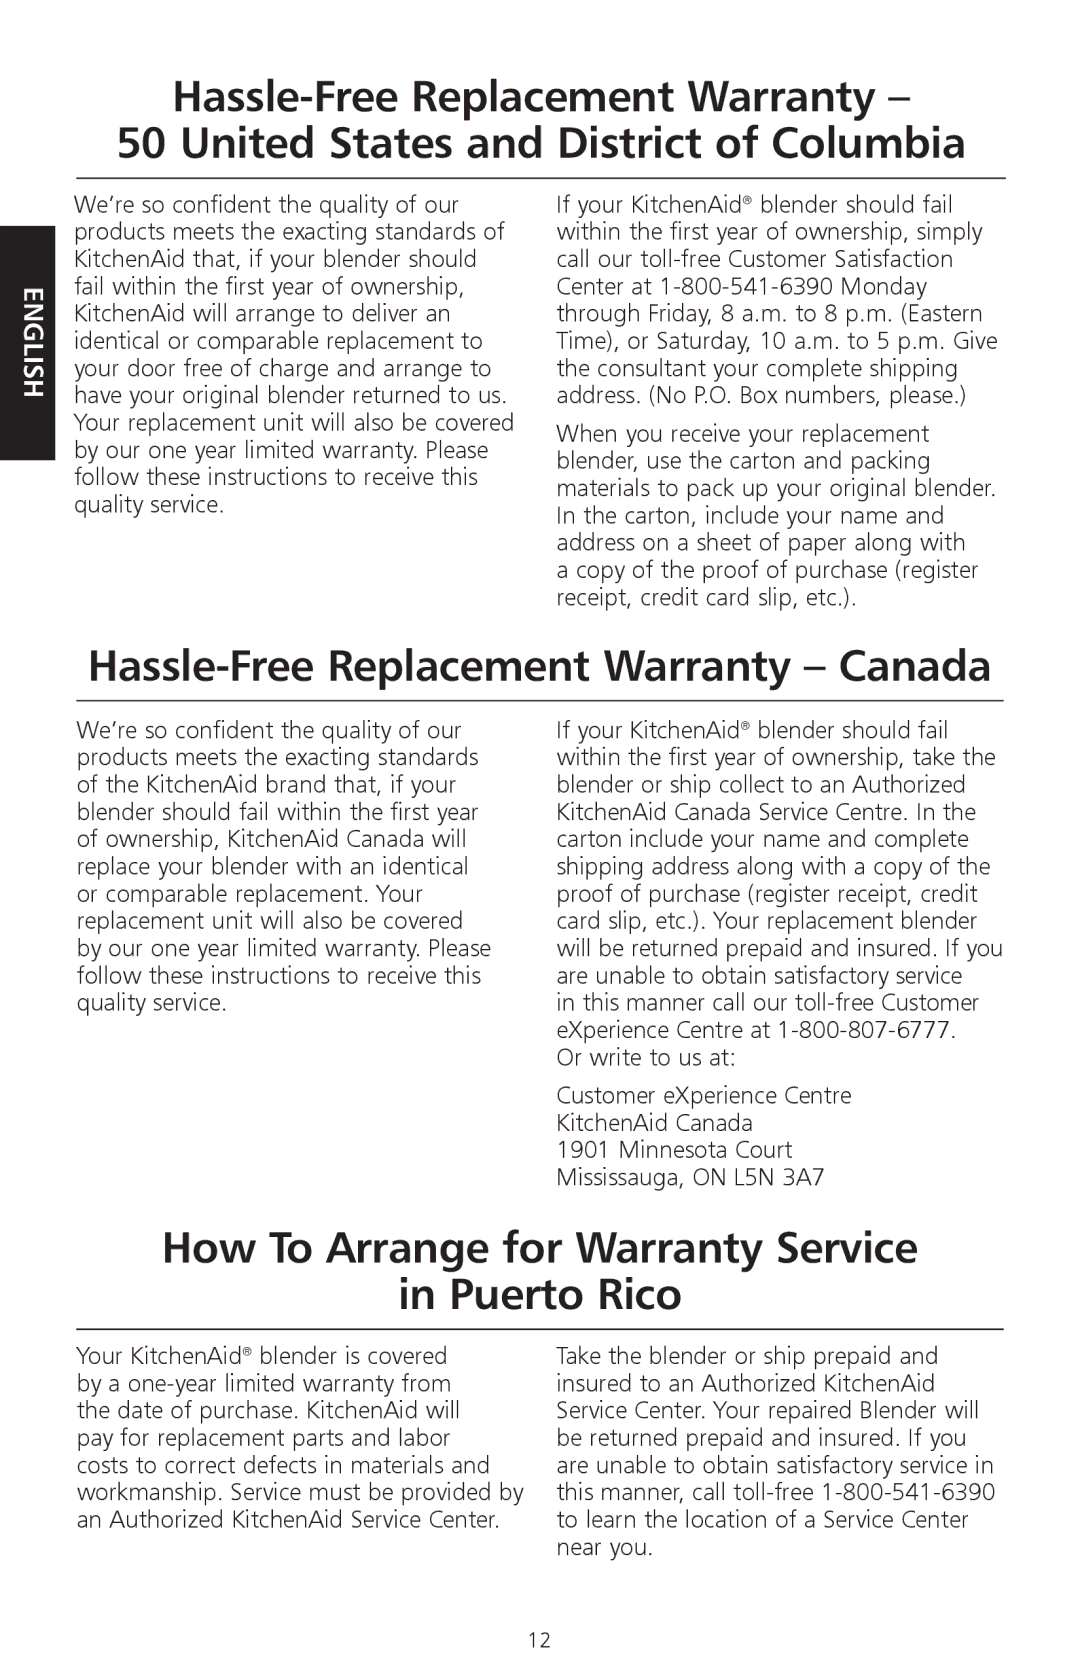 KitchenAid KSB465 manual Hassle-Free Replacement Warranty Canada, How To Arrange for Warranty Service Puerto Rico 